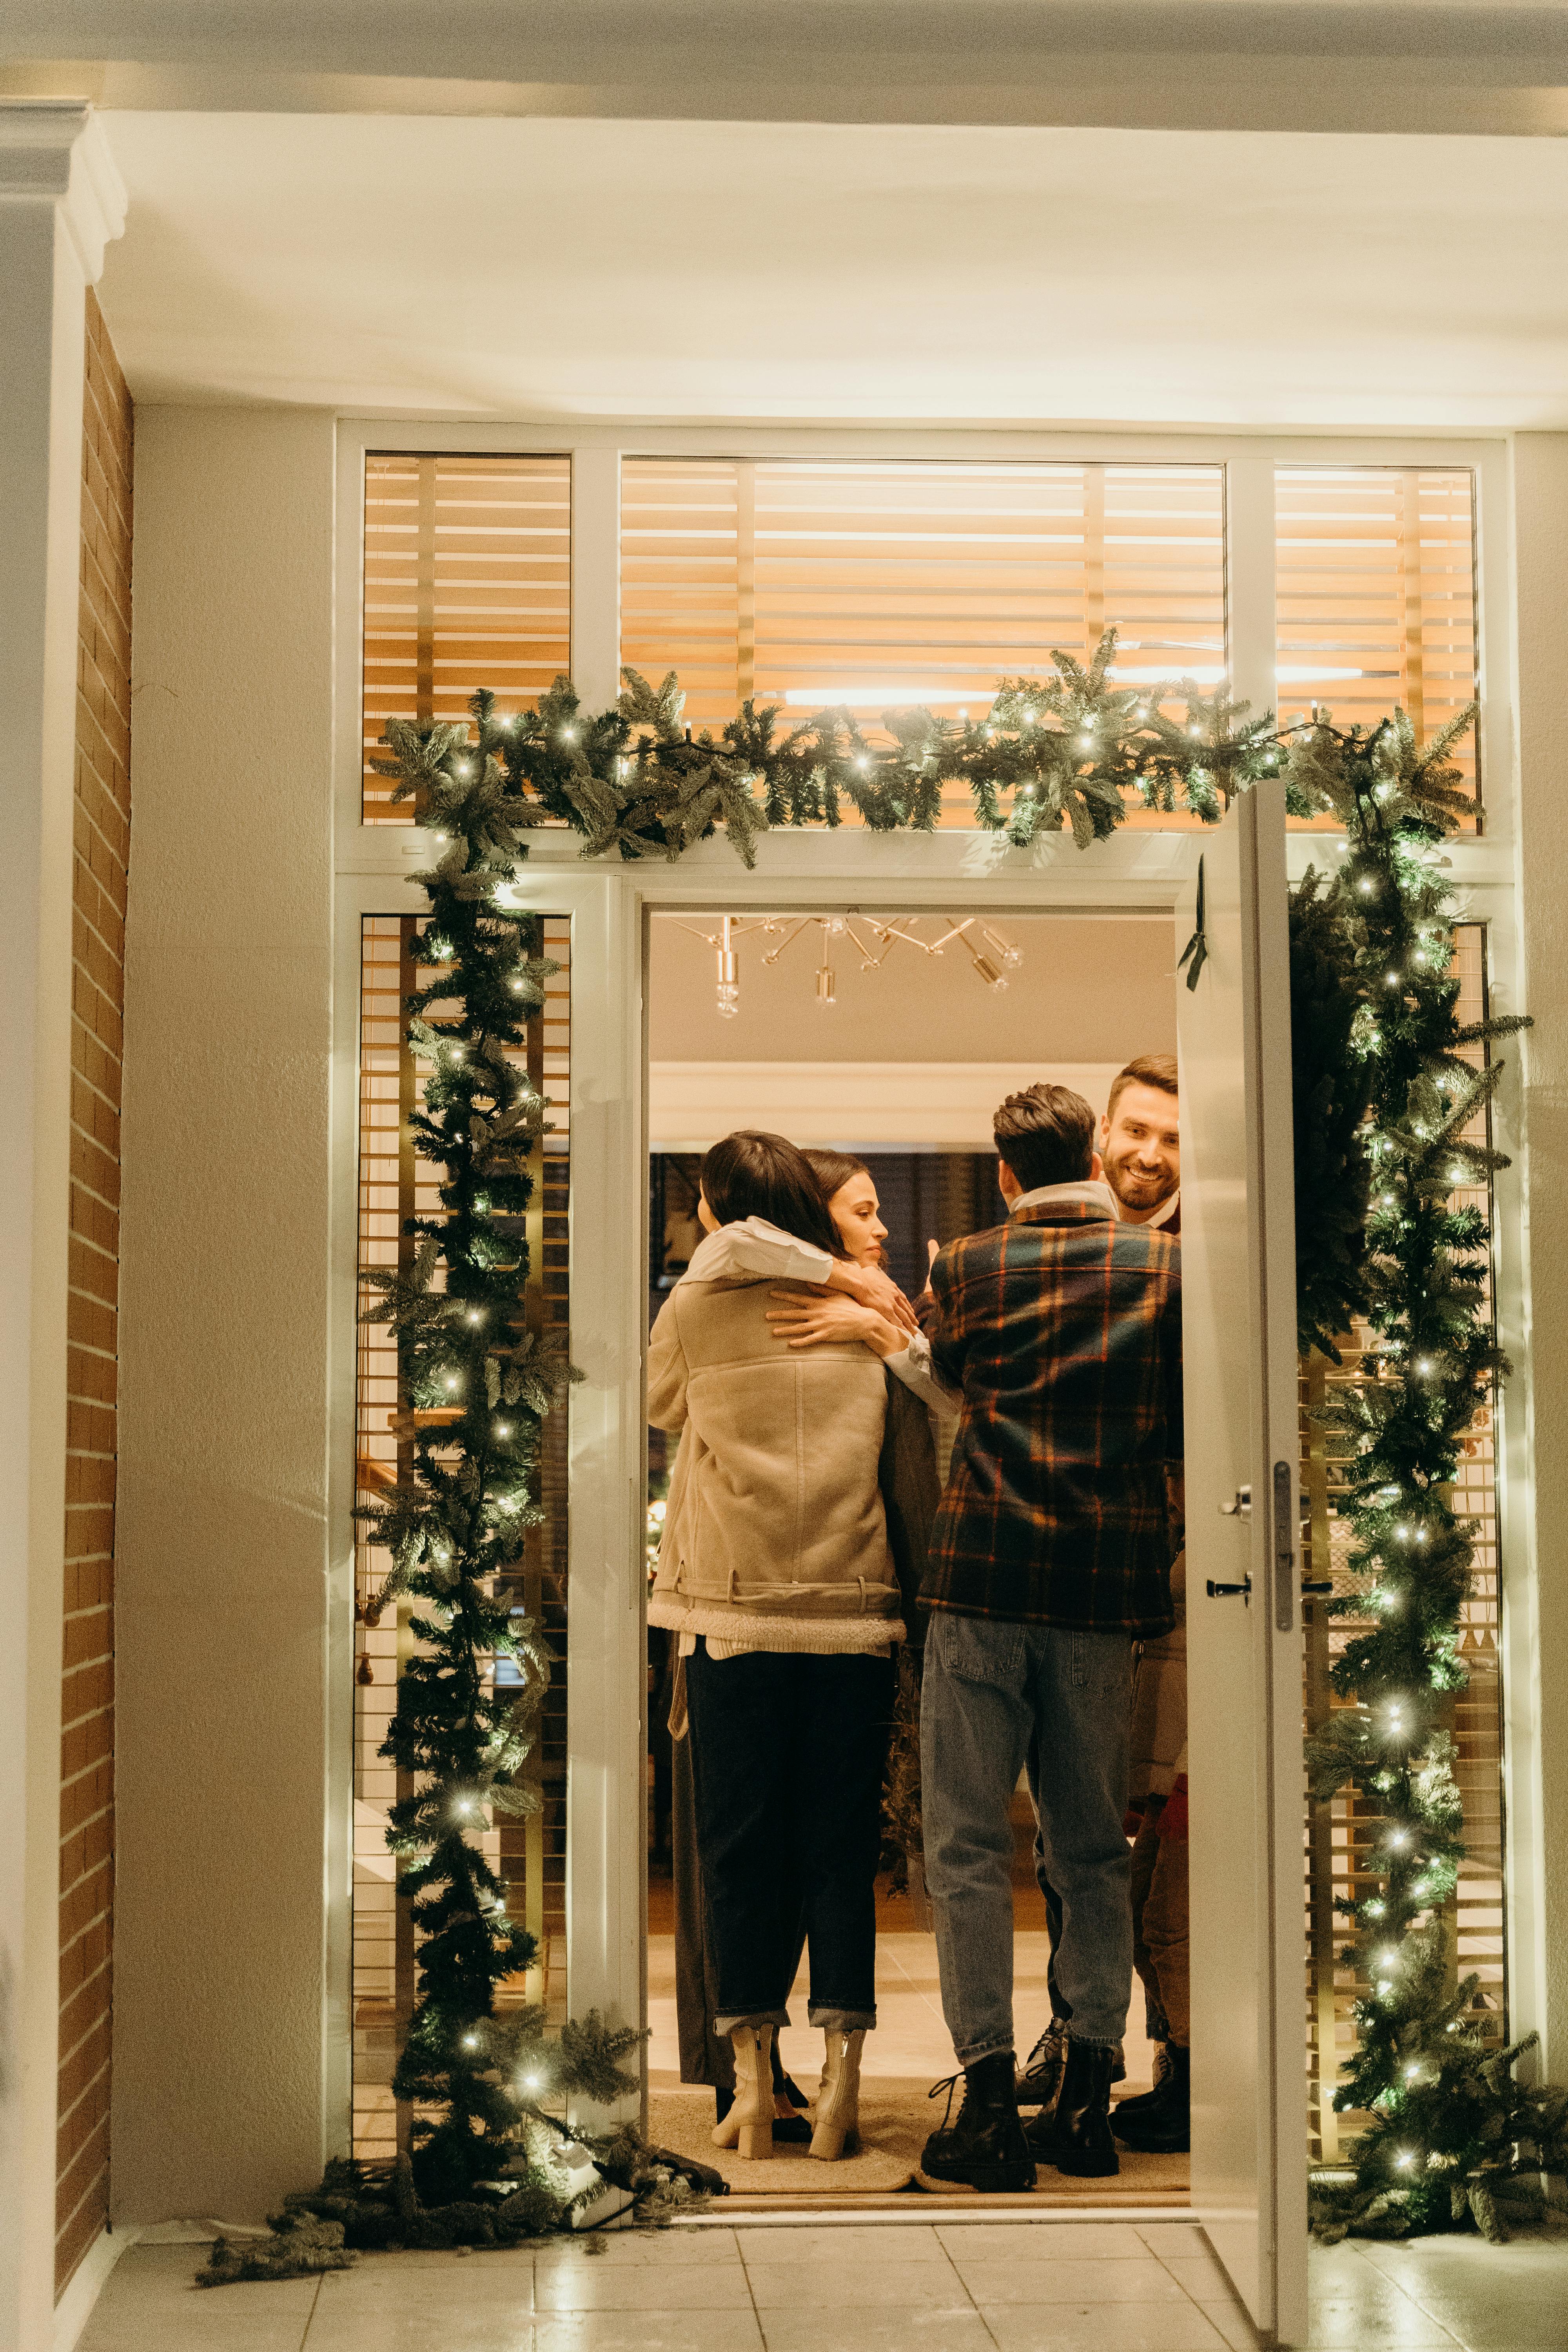 A family get-together during Christmas | Source: Pexels